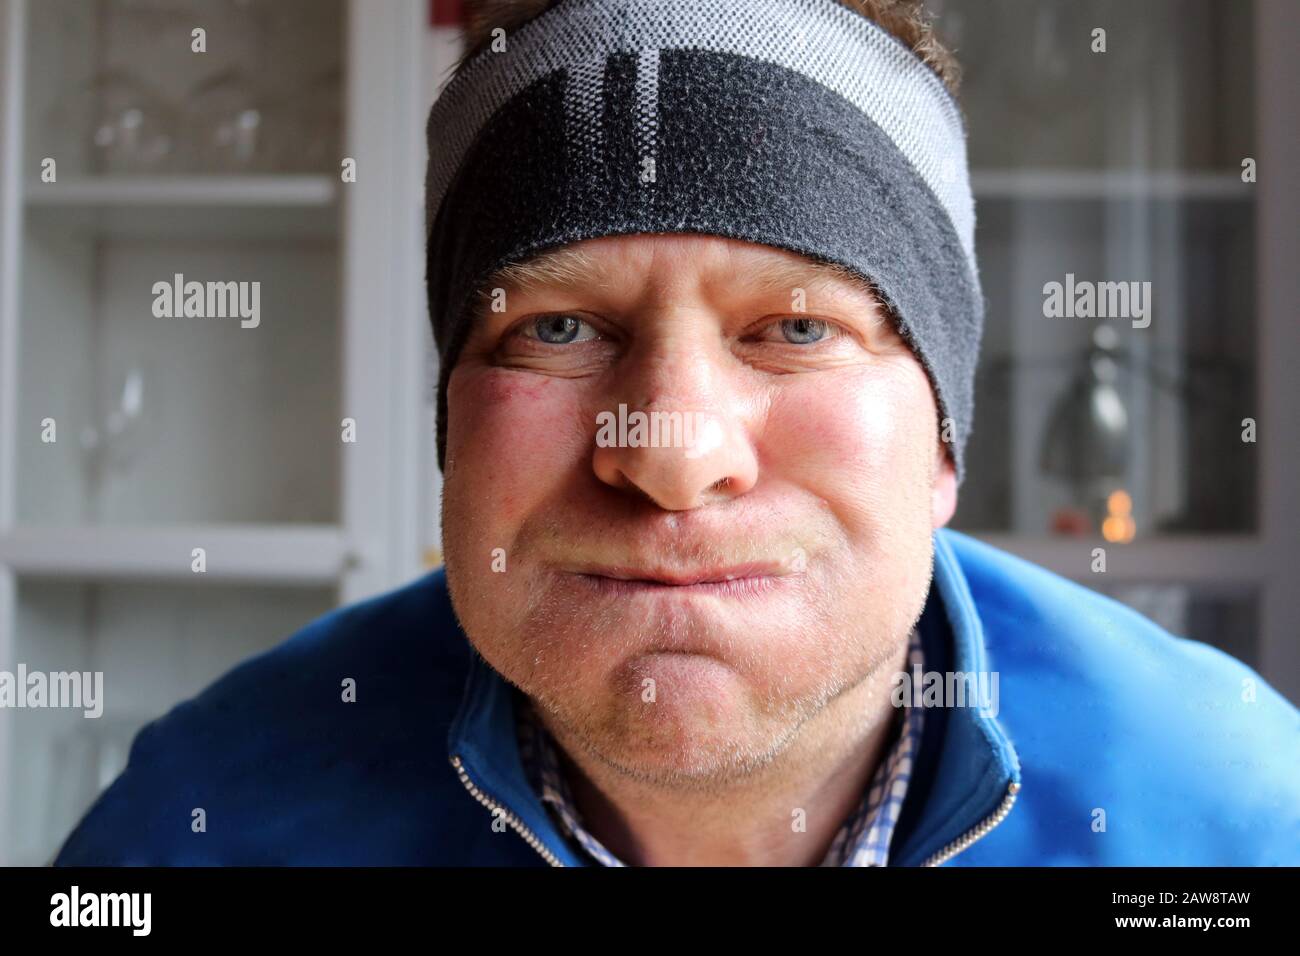 Funny face with puffed cheeks Stock Photo